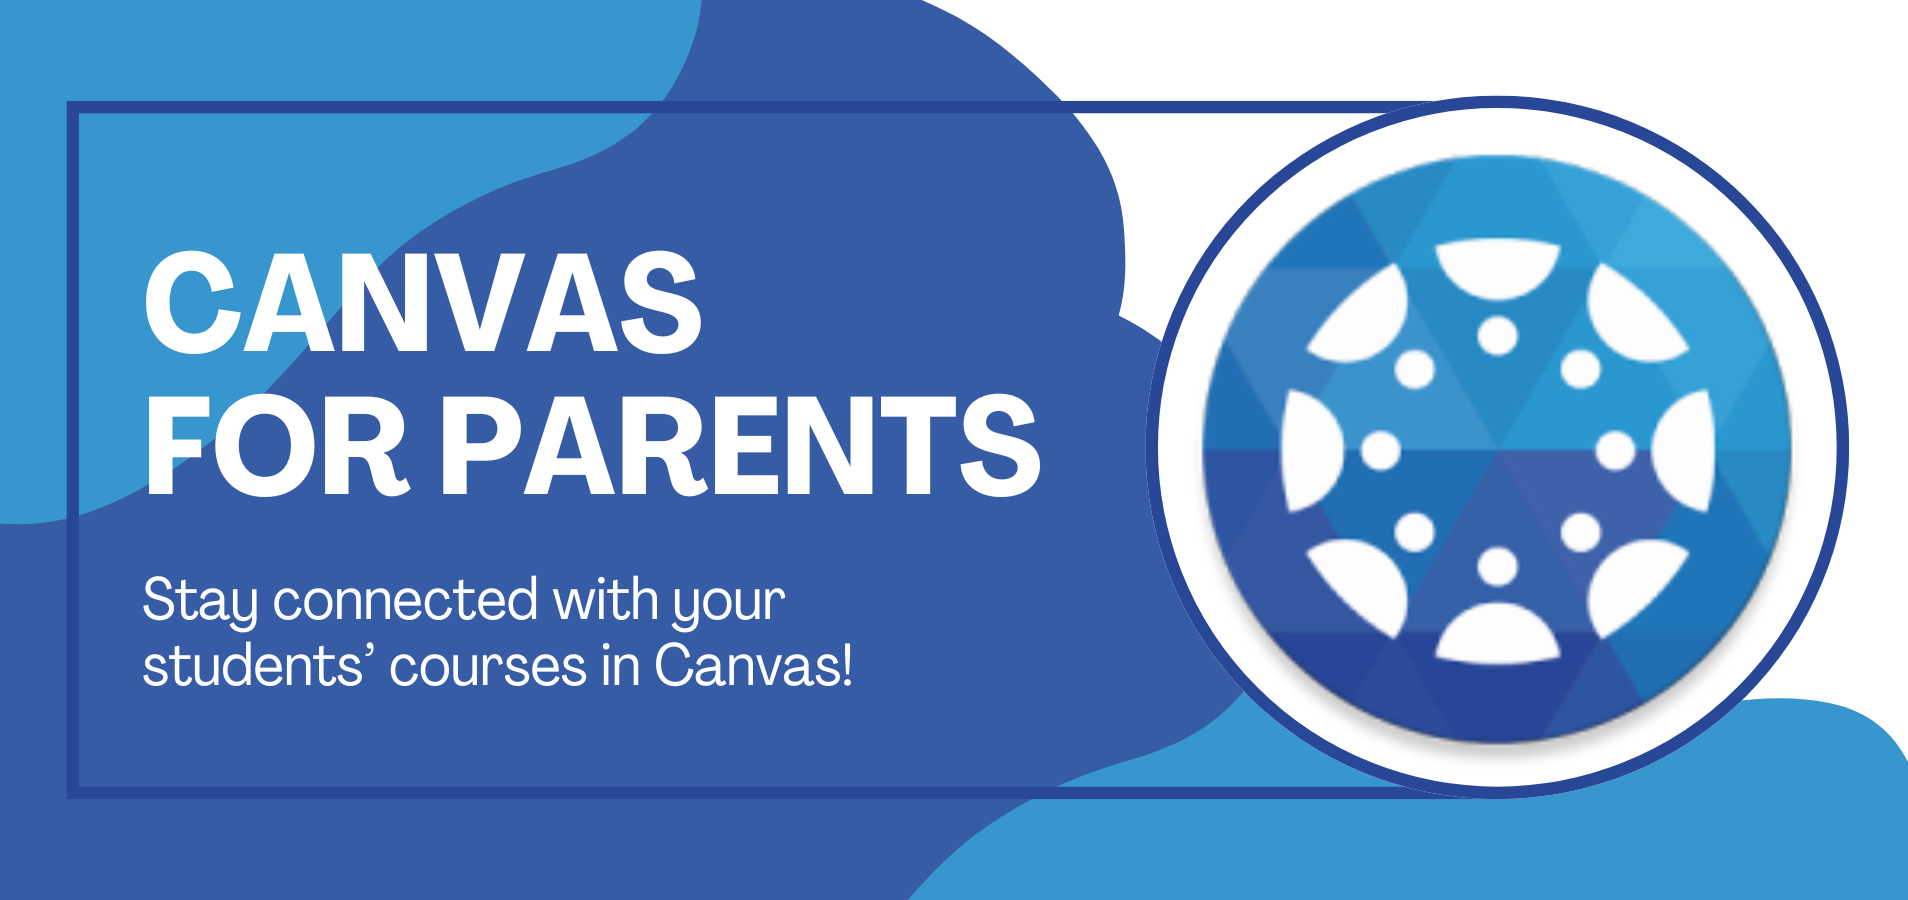 Canvas for Parents. Stay connected with your students’ courses in Canvas!